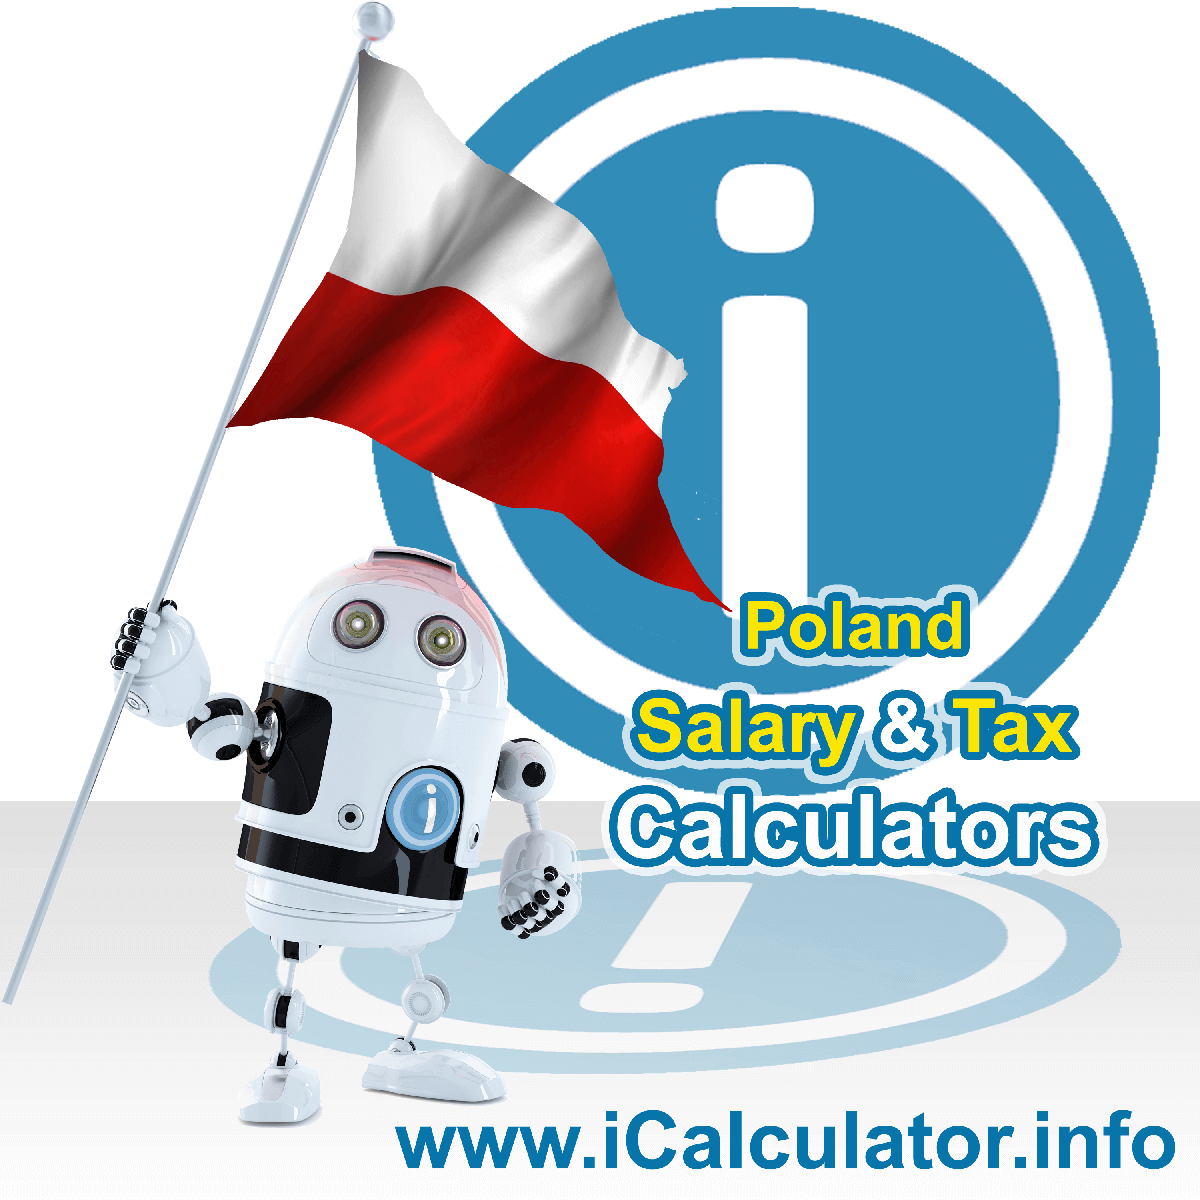 Poland Tax Calculator. This image shows the Poland flag and information relating to the tax formula for the Poland Salary Calculator